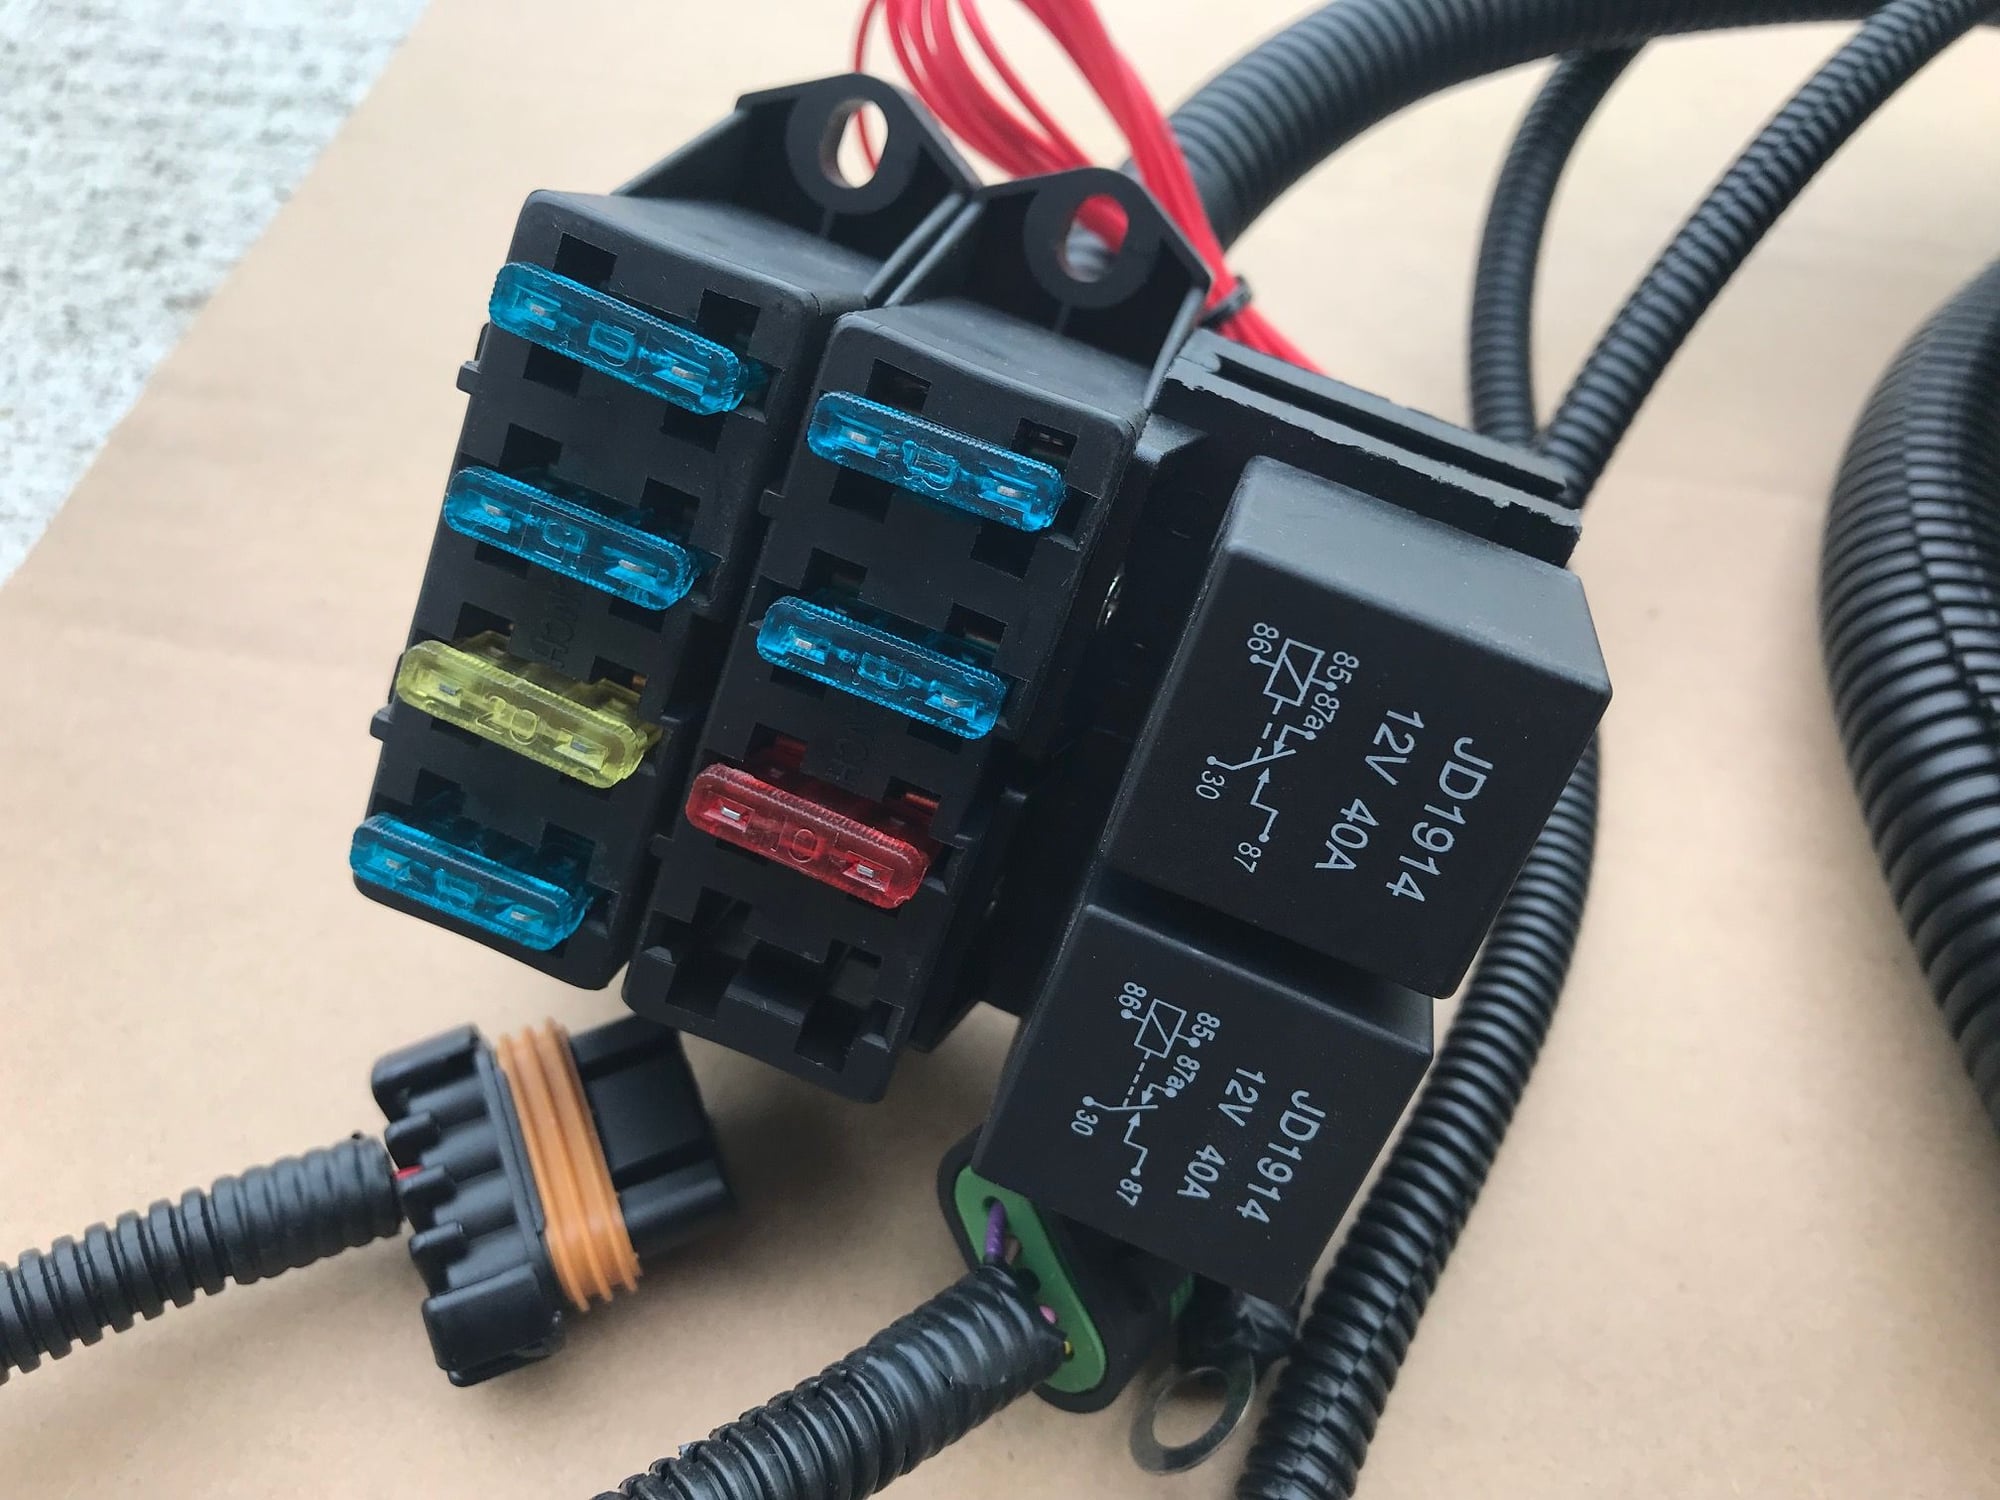  - New 1999-2003 LS Swap Standalone Wiring Harness for T56/TH350/TH400 - Indianapolis, IN 46077, United States